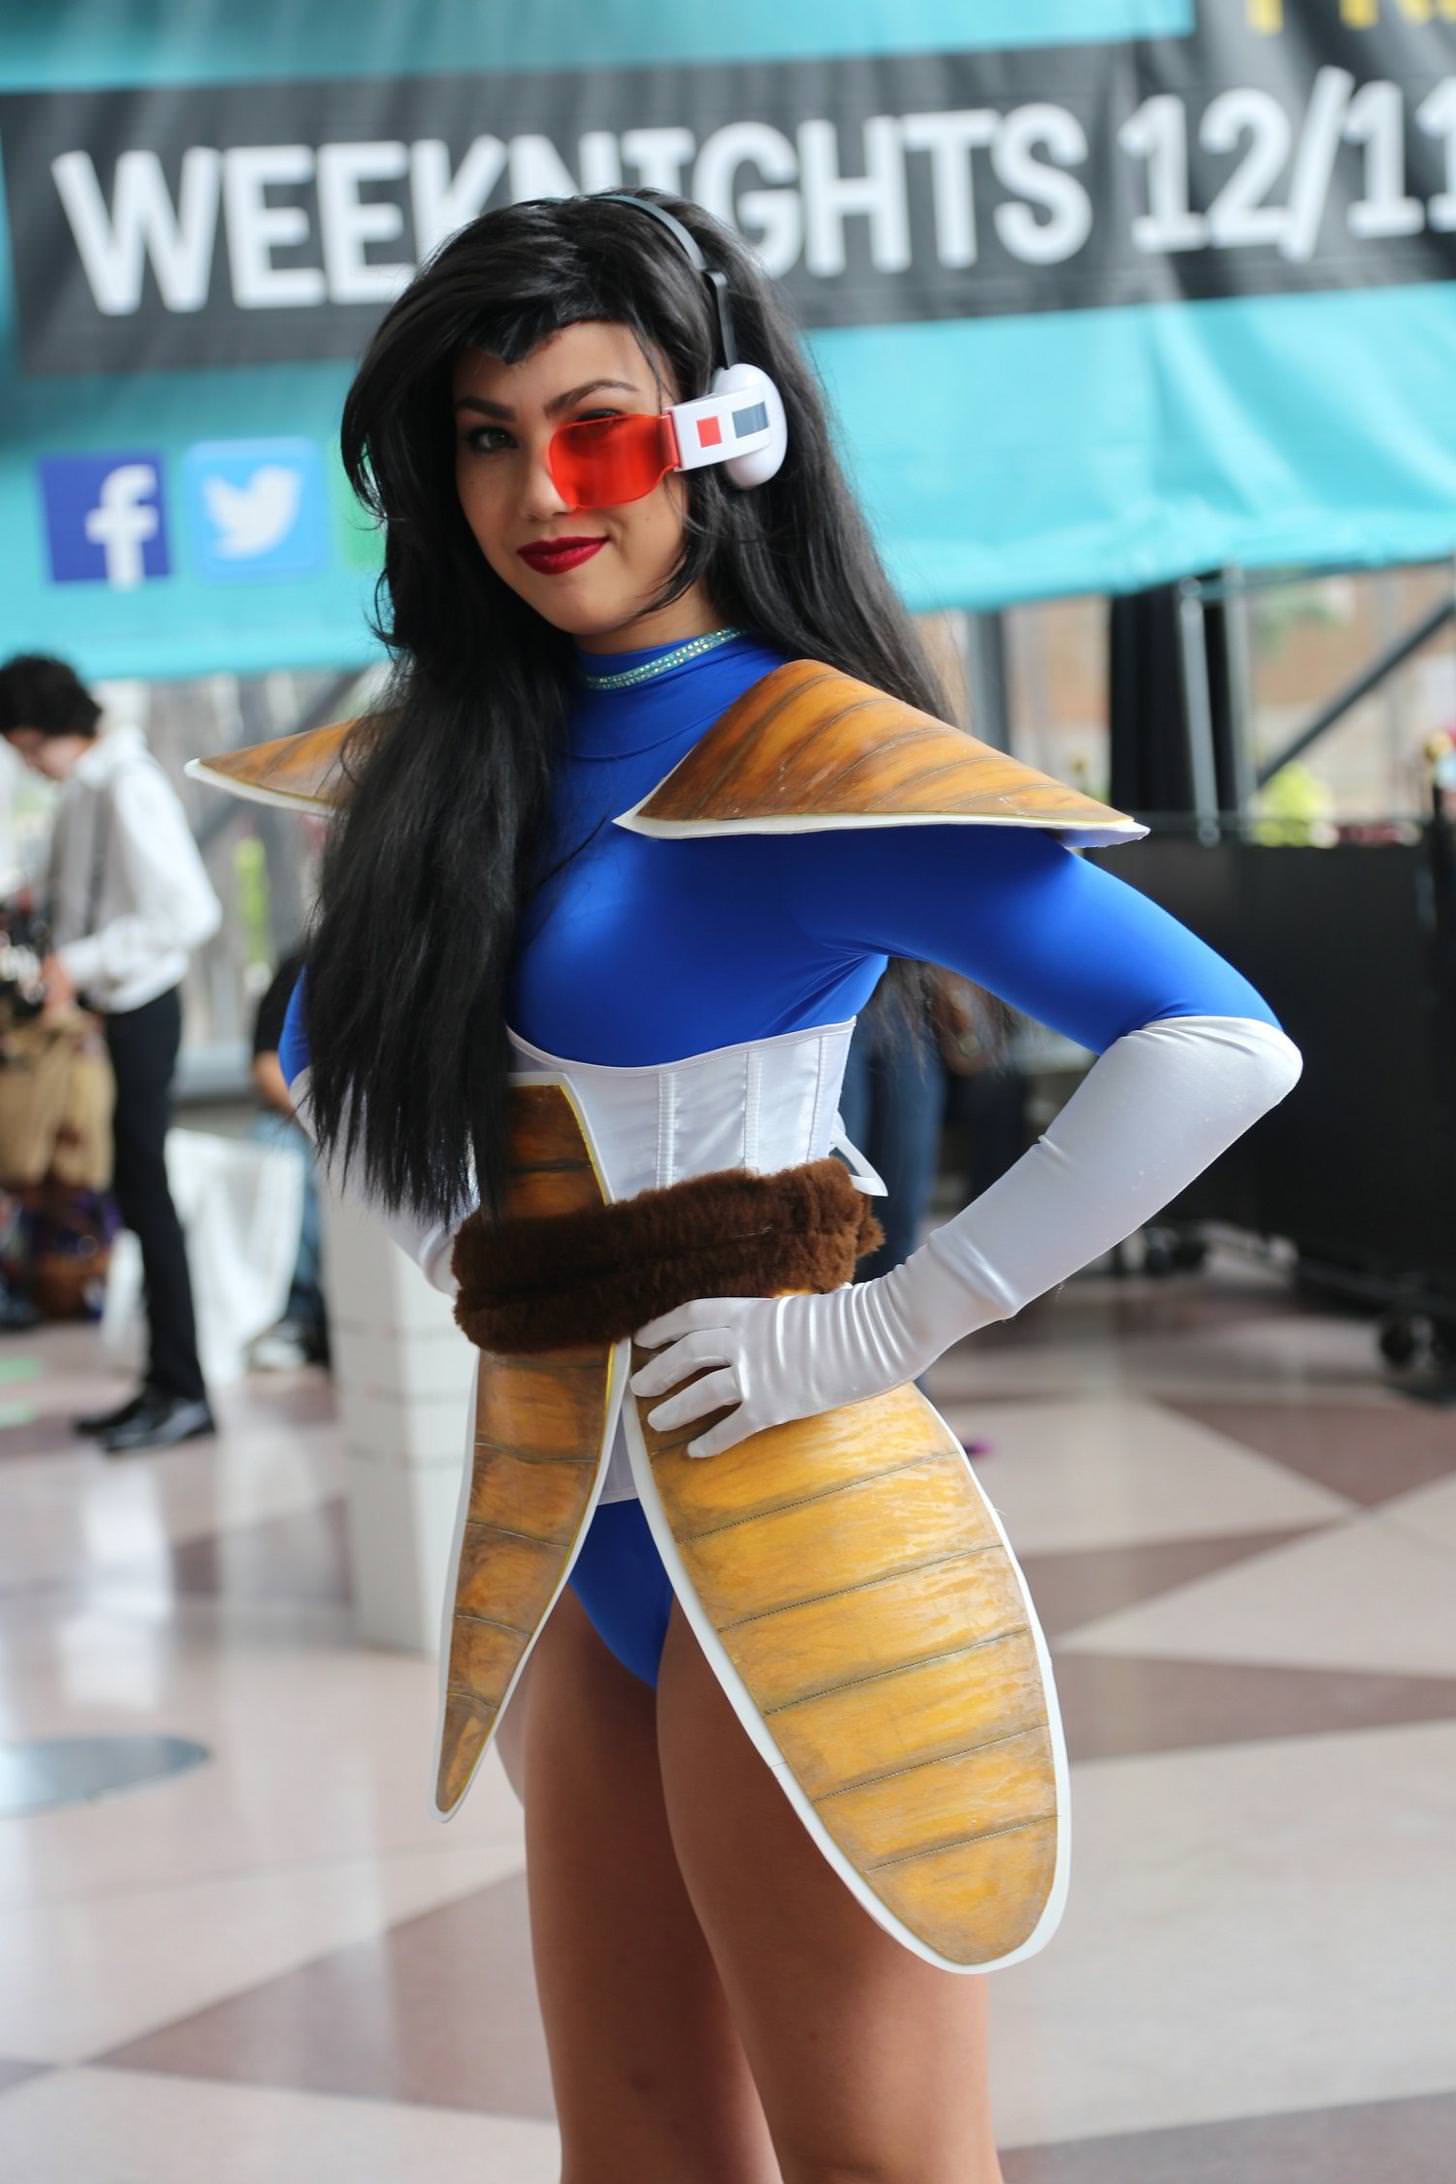 costumes and cosplay - female vegeta cosplay - Weevntghts 121